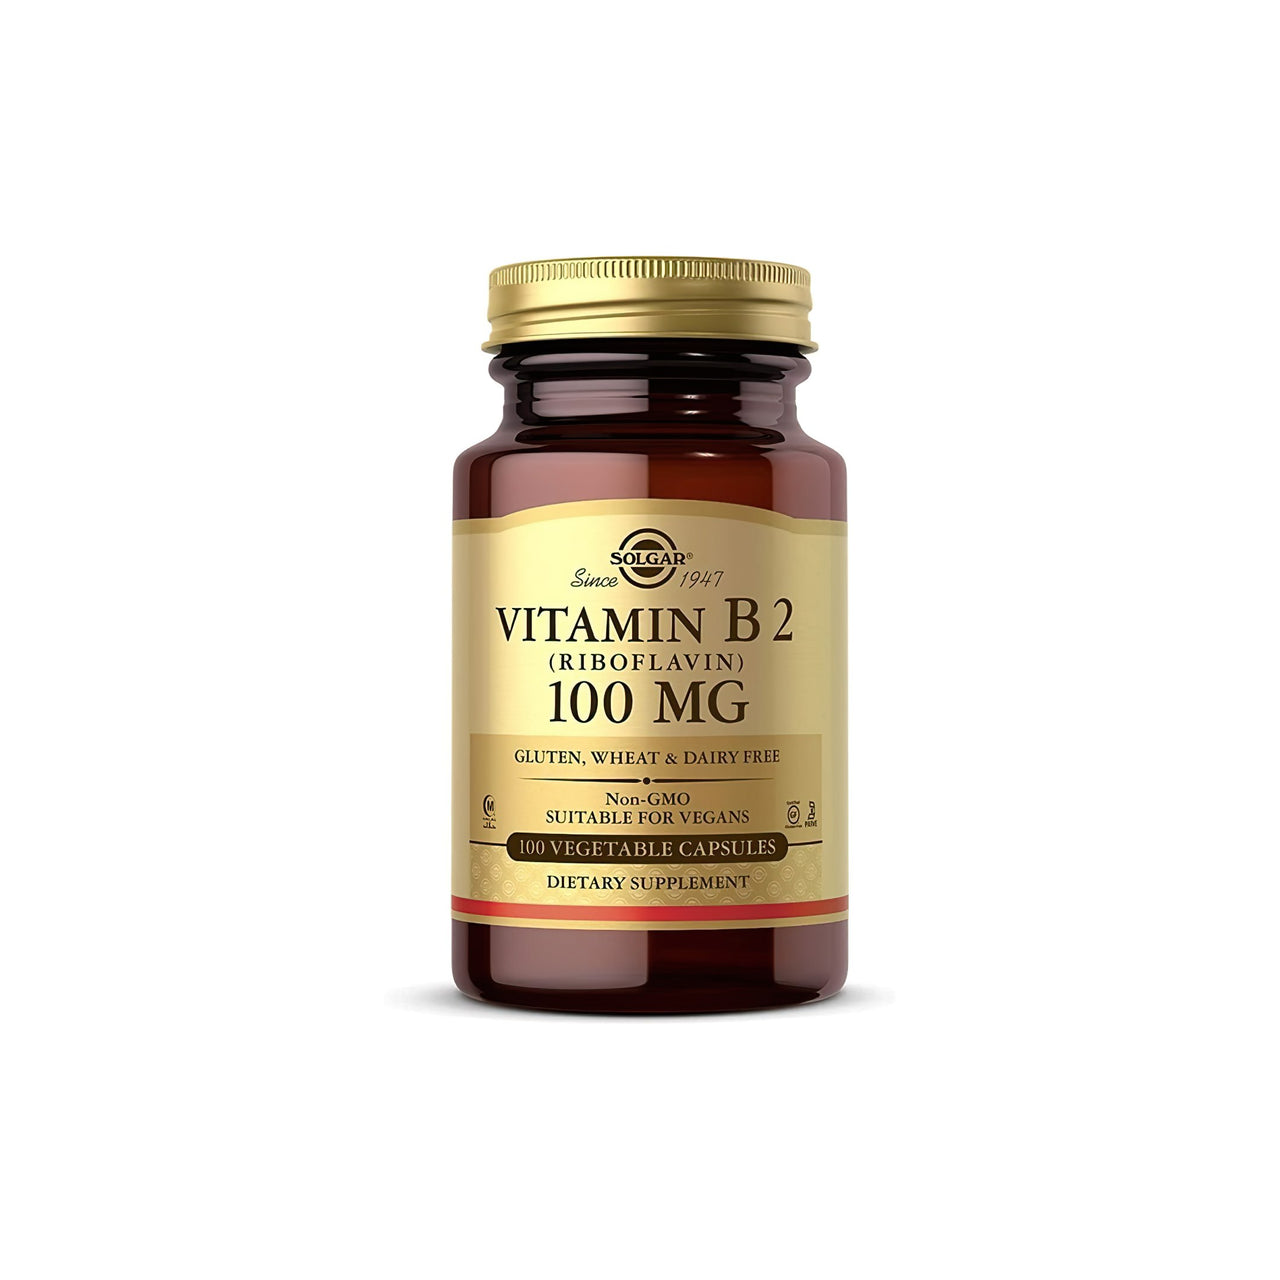 Solgar's Vitamin B2 (Riboflavin) 100 mg 100 Vegetable Capsules containing riboflavin and coenzyme.